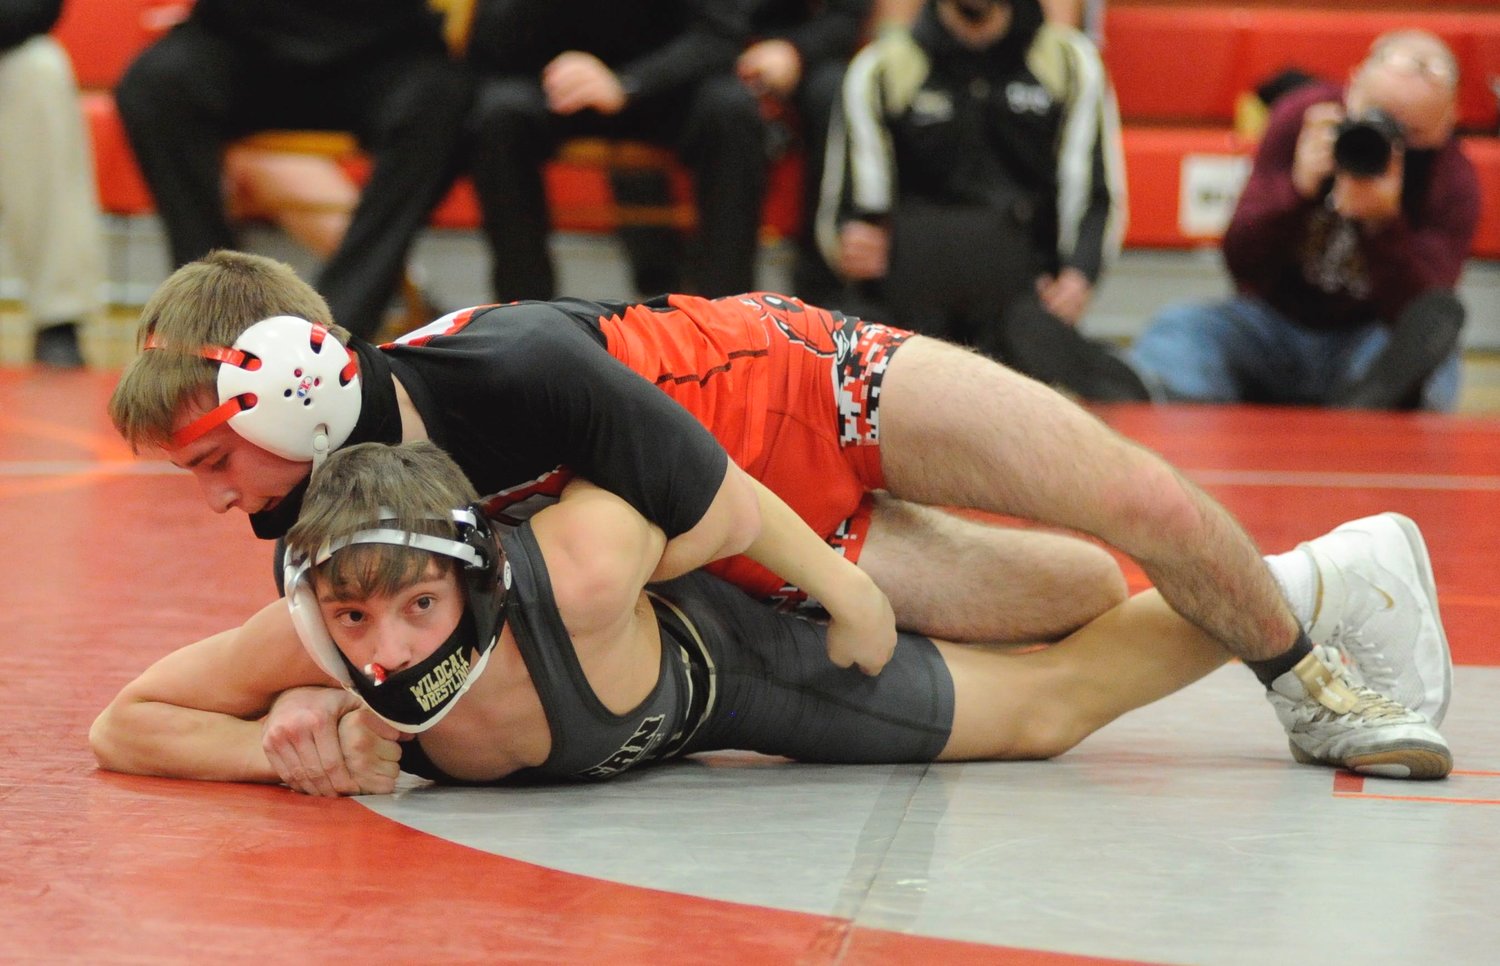 In bout #6, Honesdale’s Tristyn Bodie won by fall in the 126-pound weight class. Bodie was a district finalist.